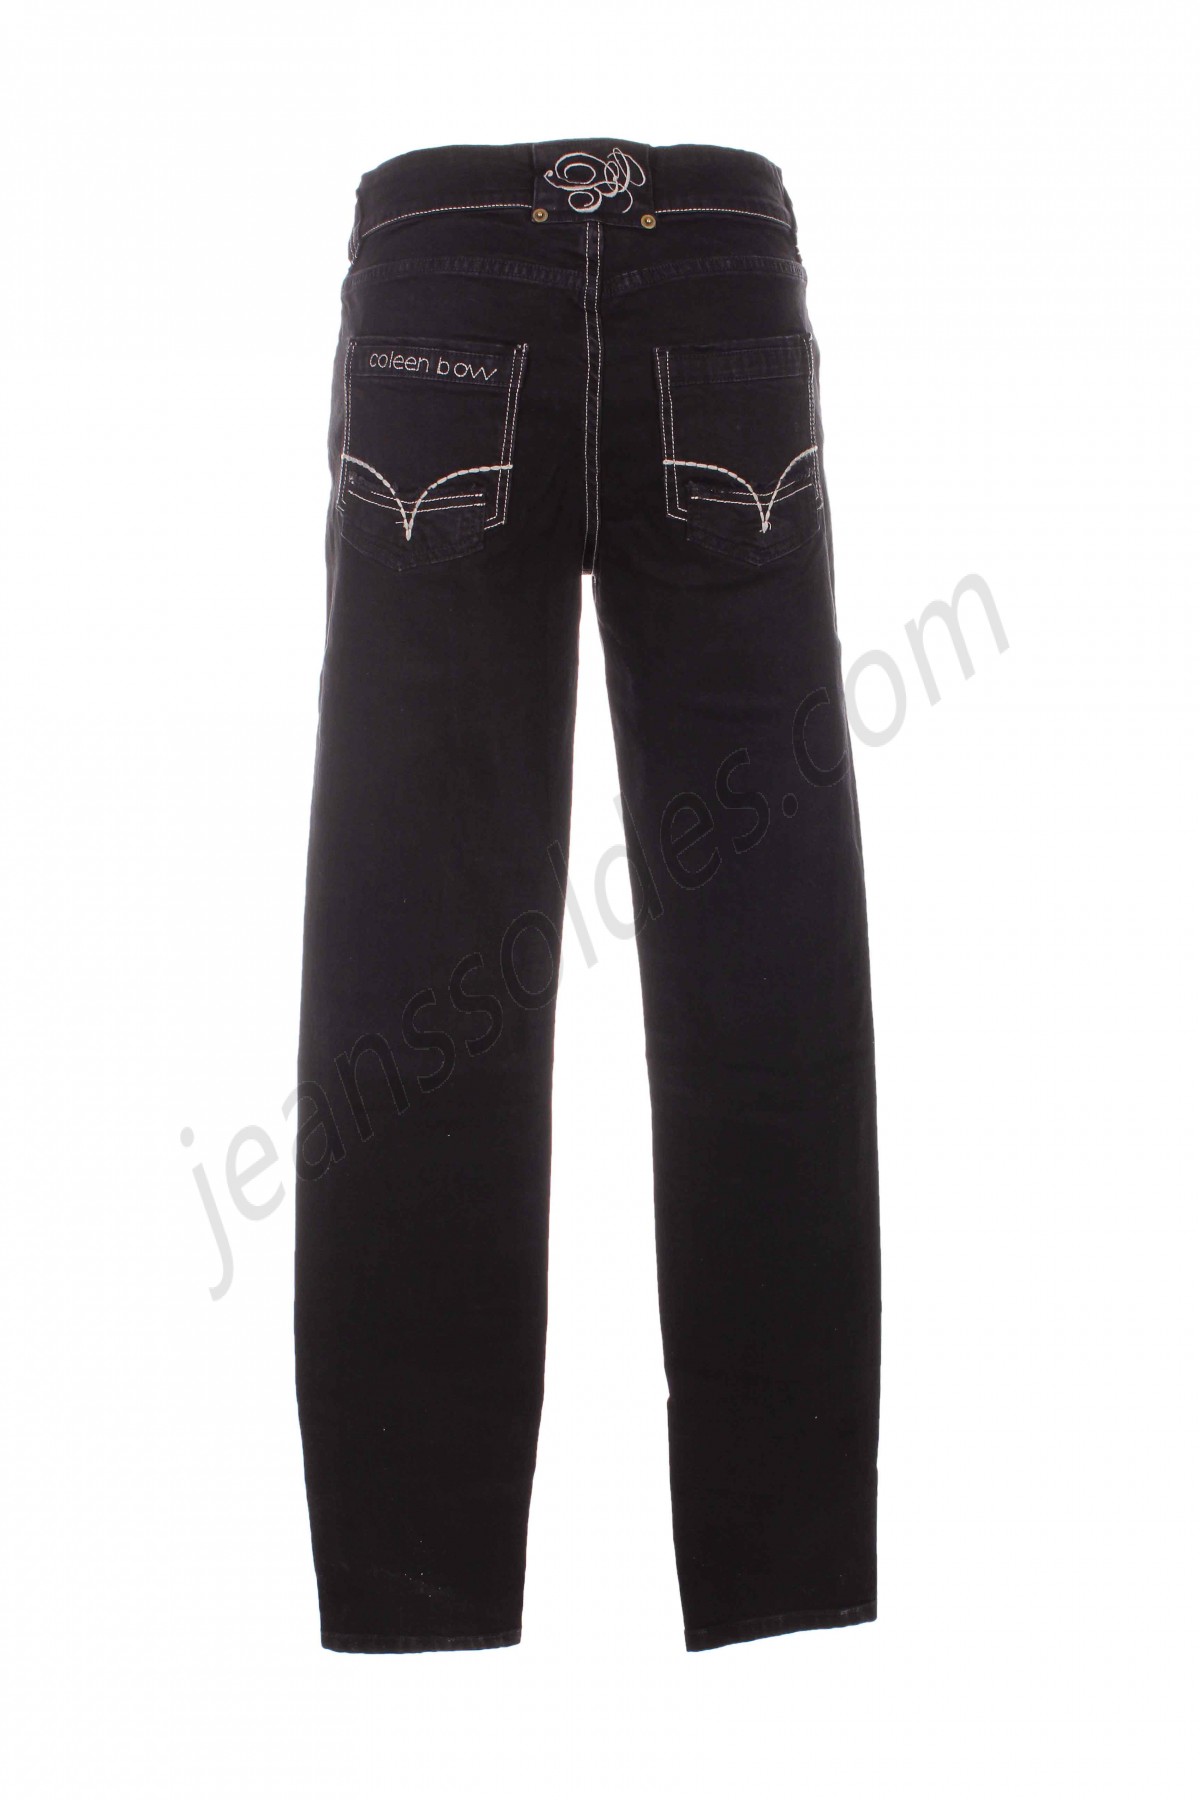 coleen bow-Jeans coupe slim prix d’amis - -1